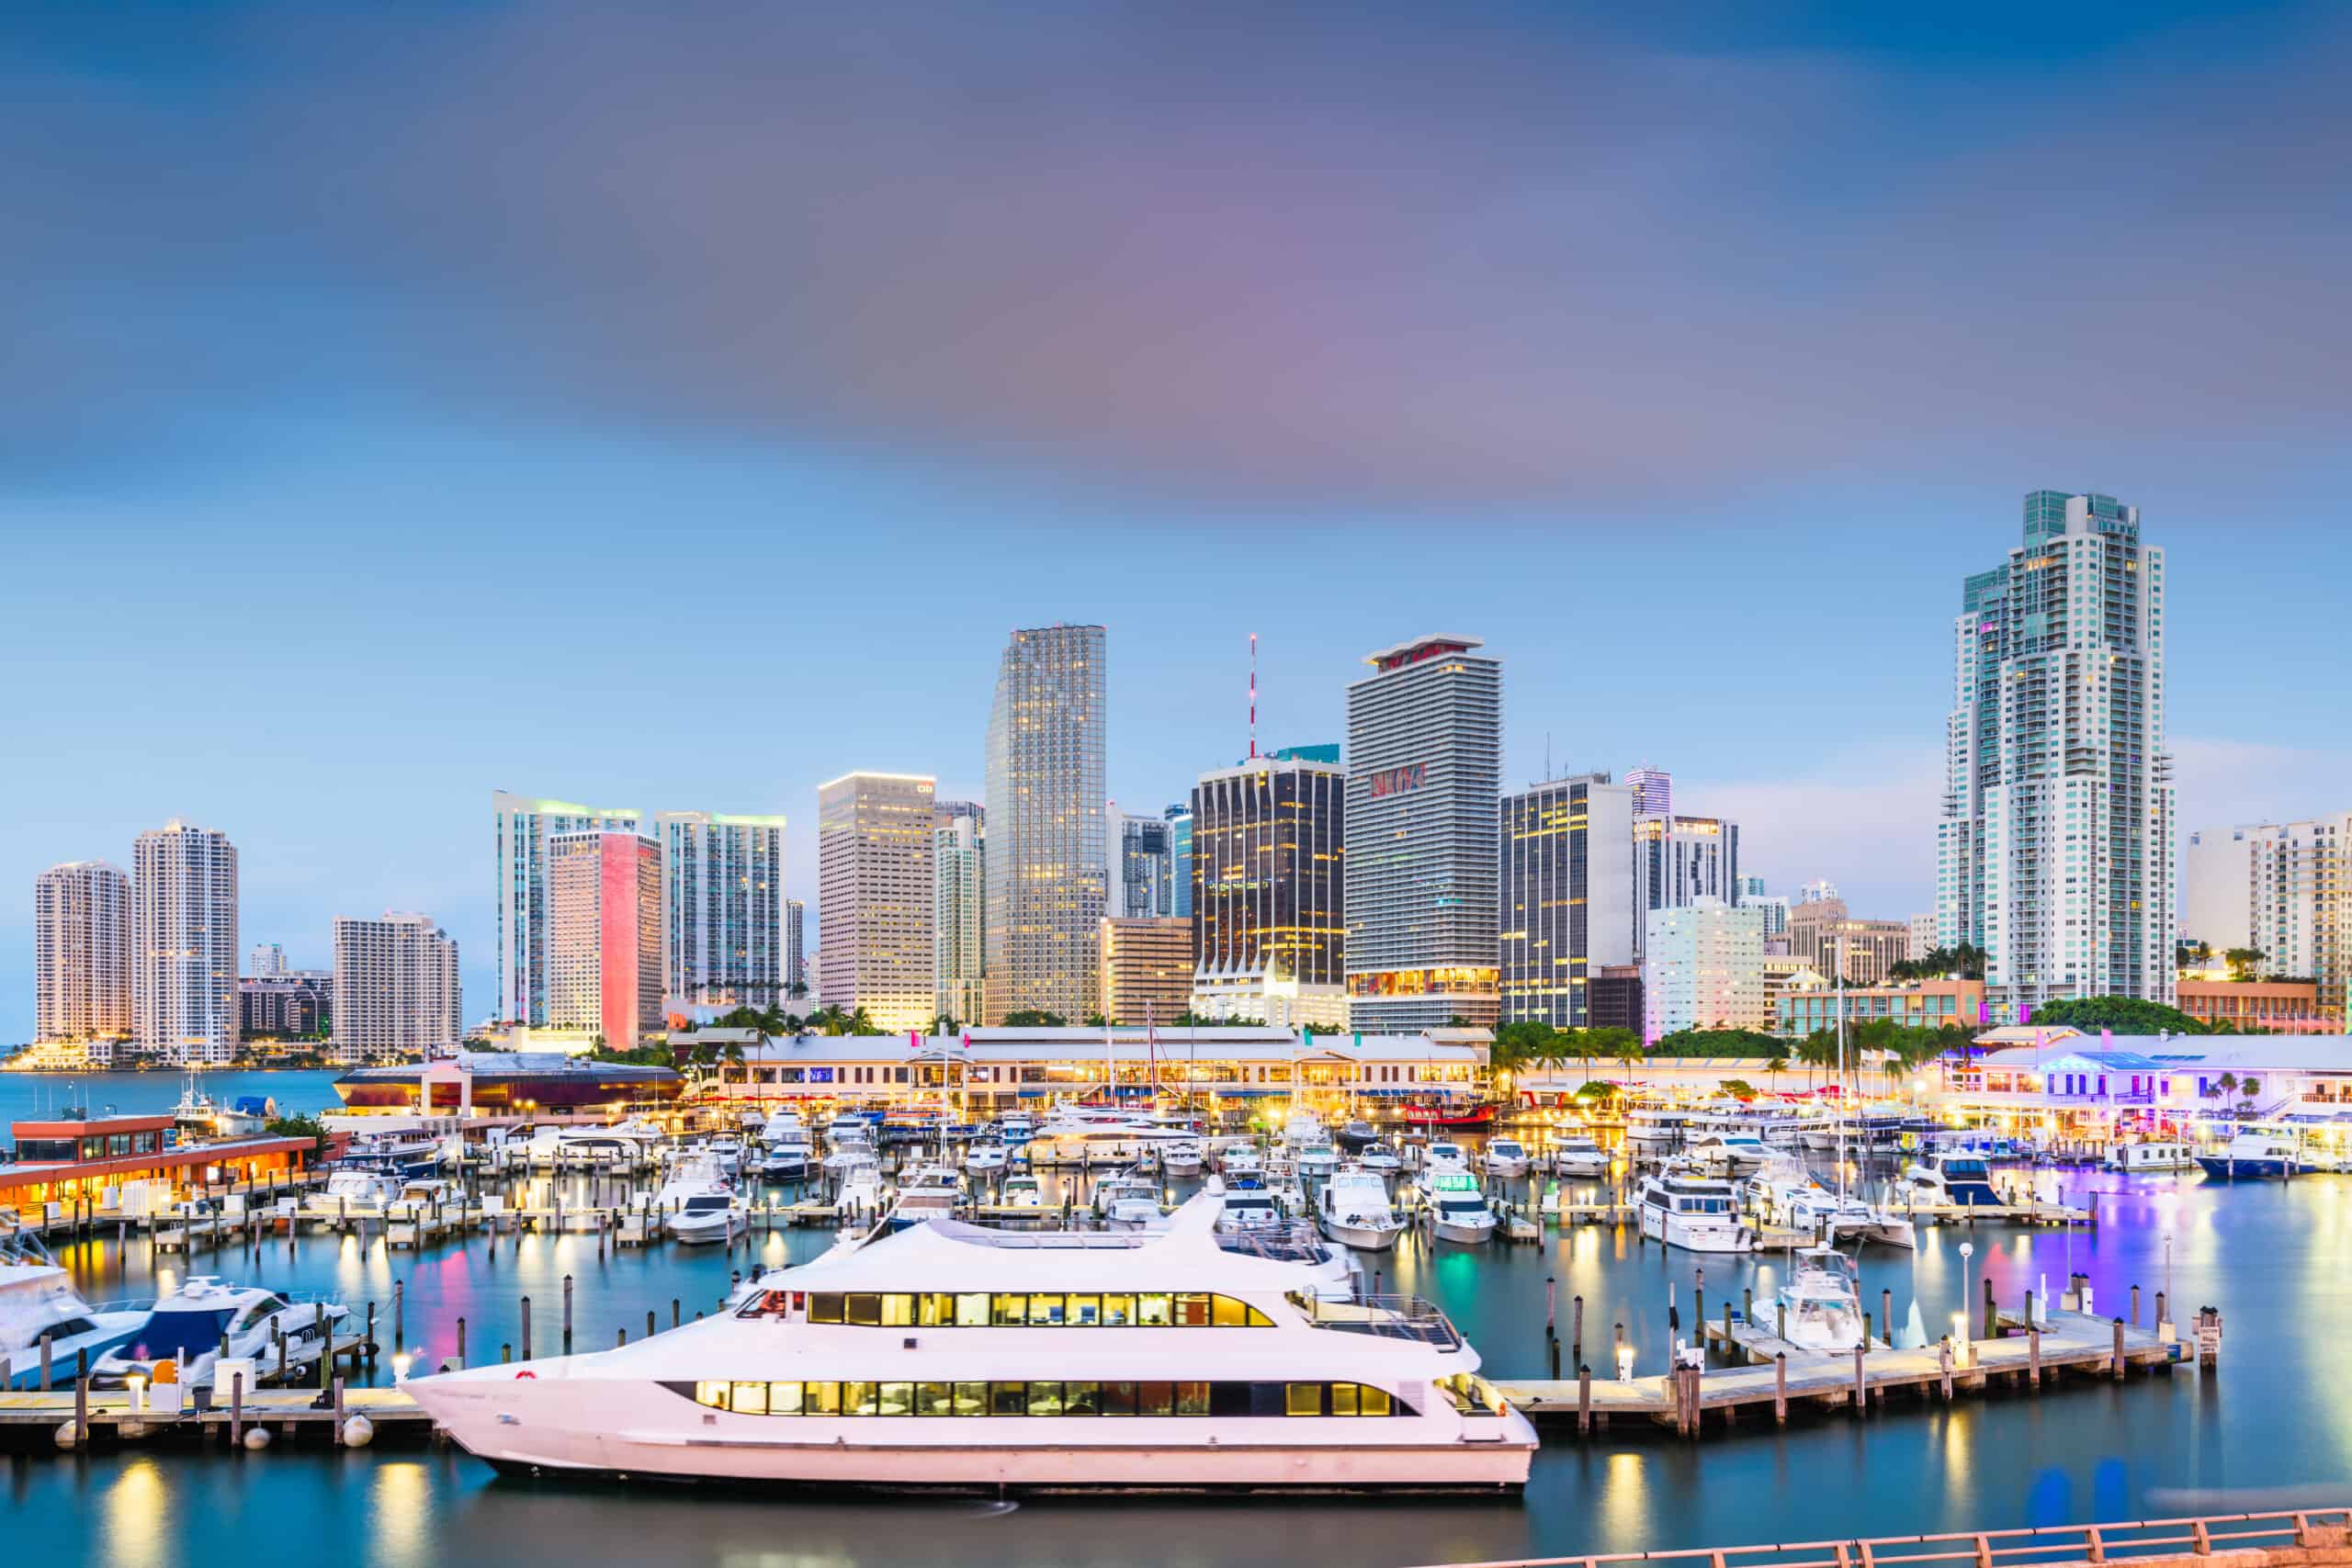 Yachts and day cruises in a large port in Miami with the skyline in the background